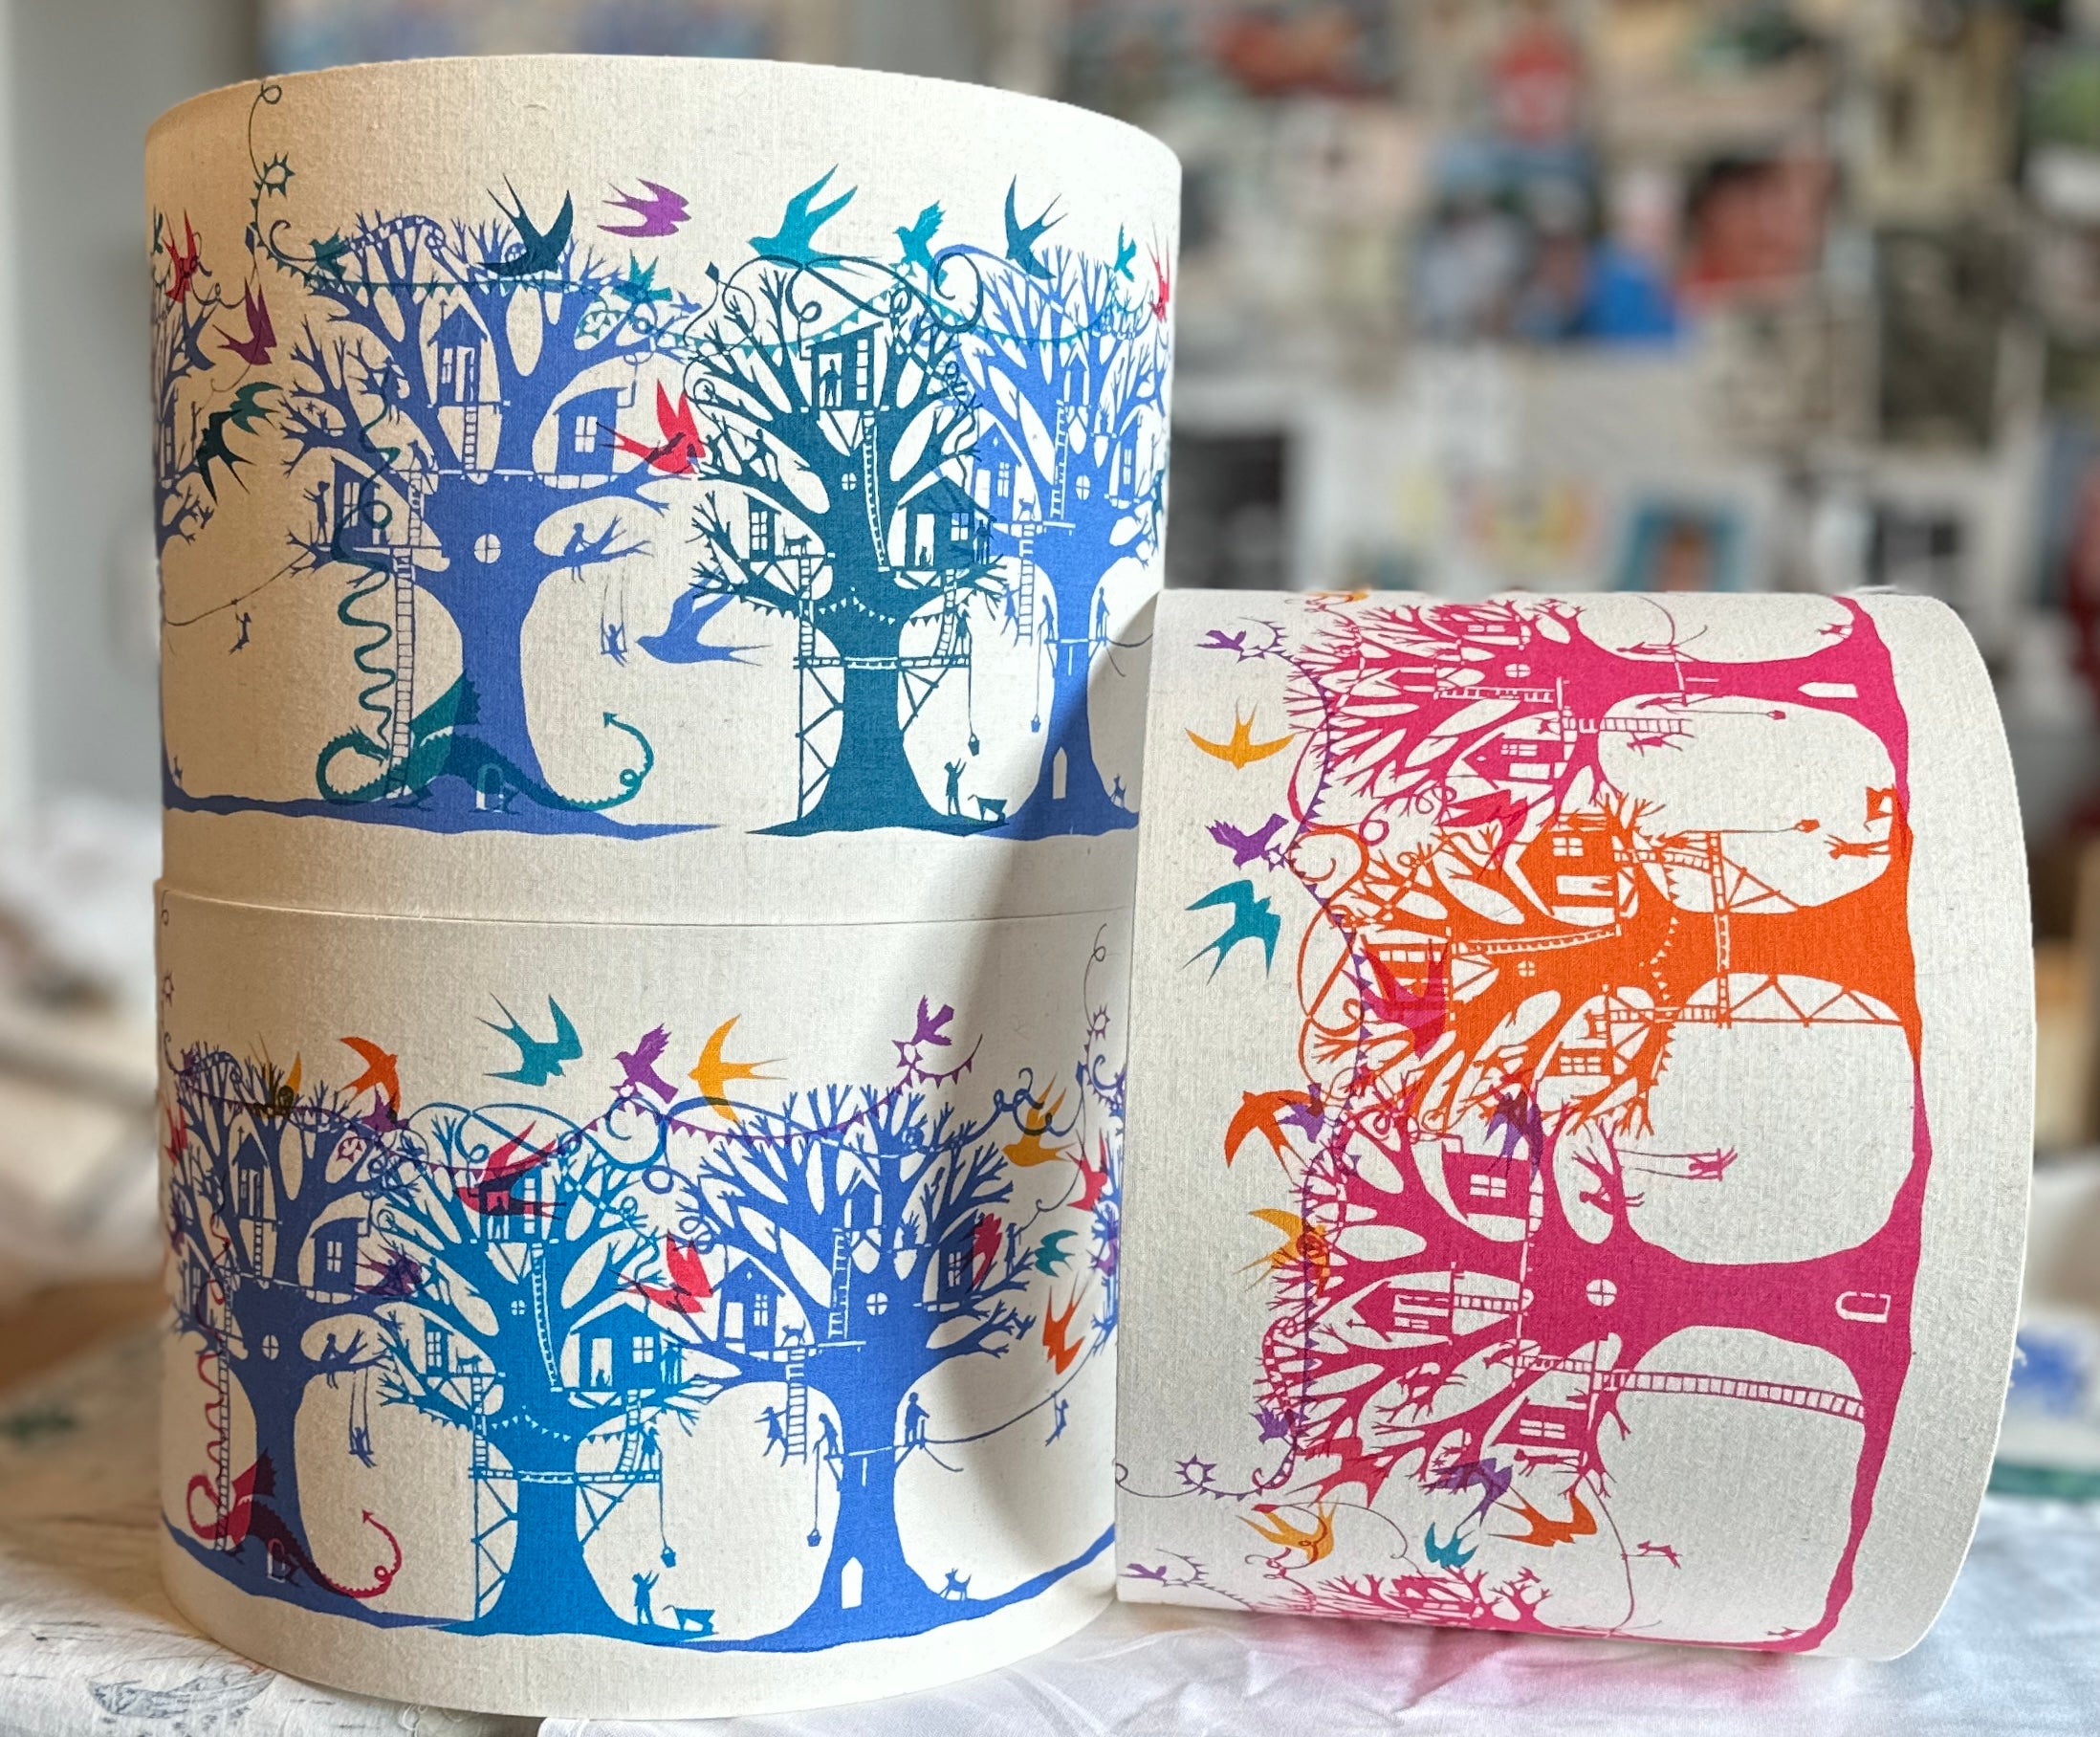 Three treehouse lampsahdes in blue pink and orange on a natural background